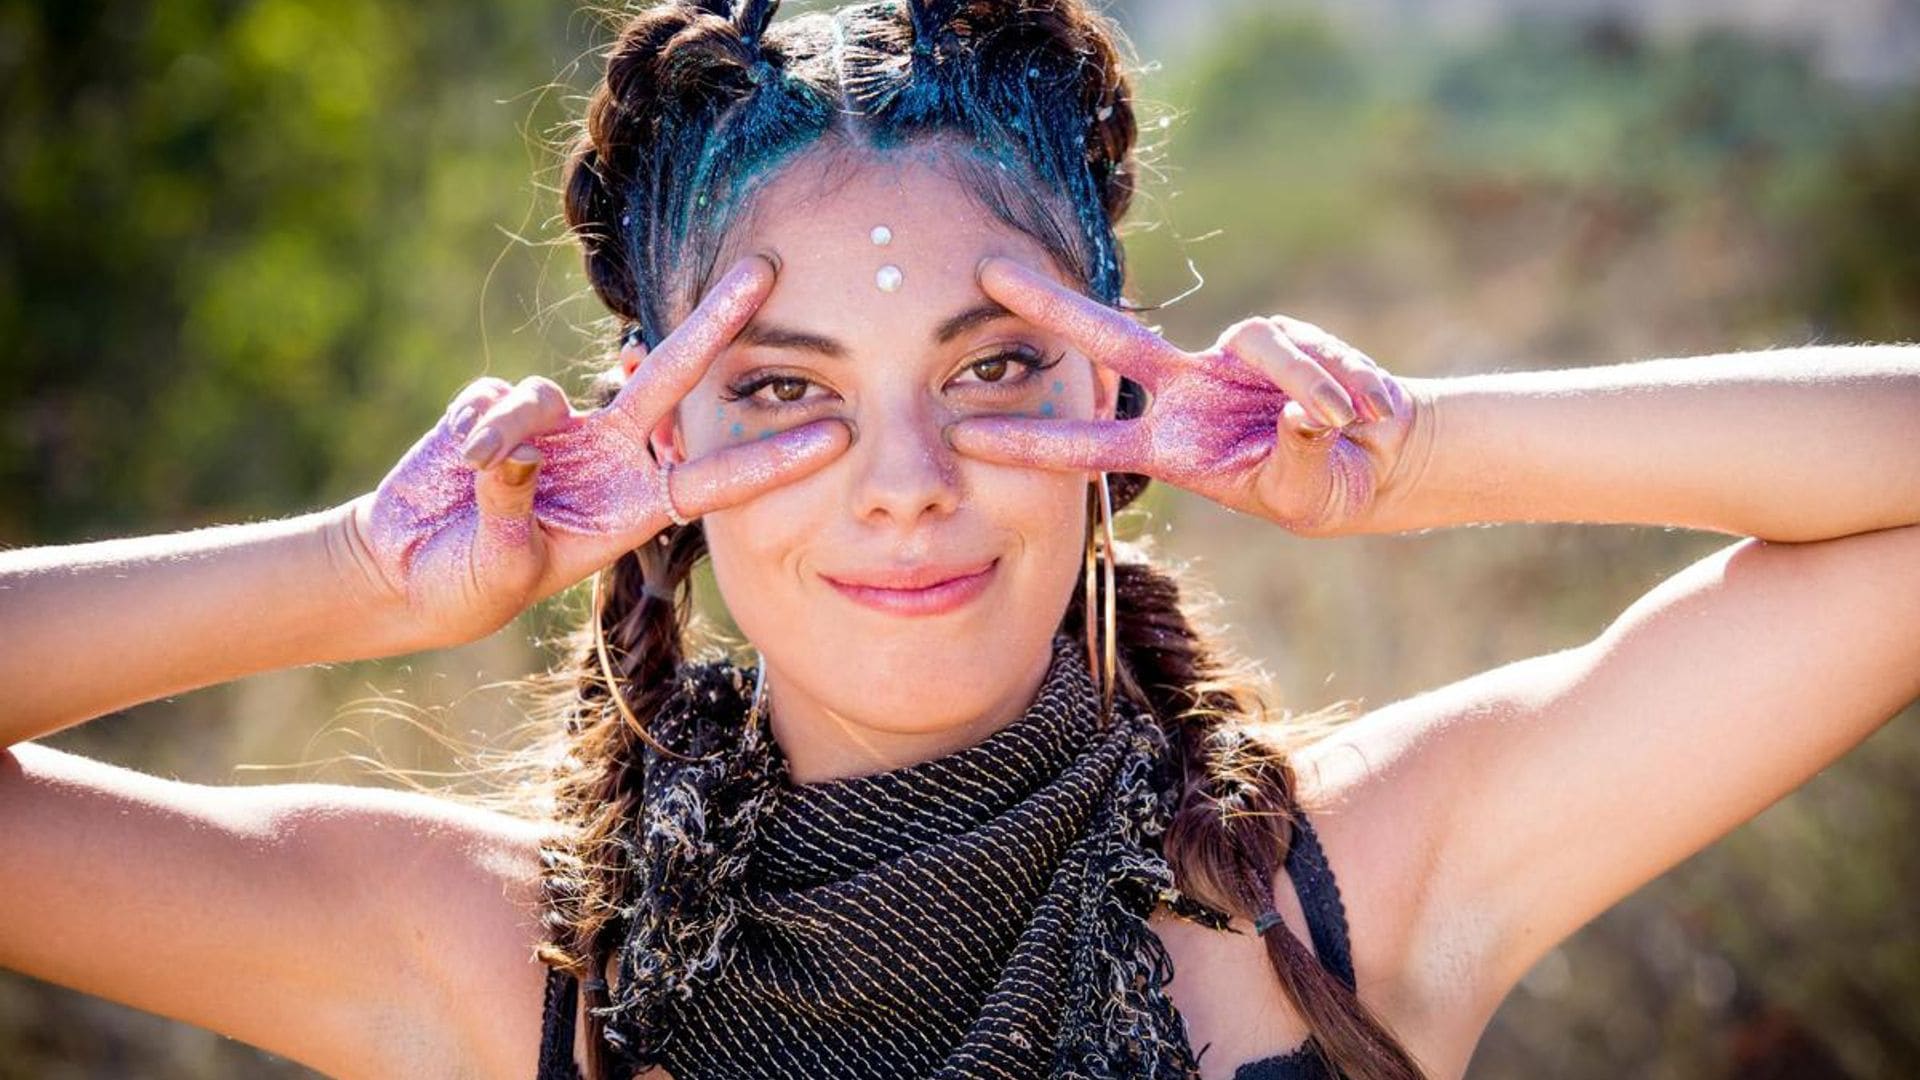 Skincare tips for surviving Coachella: keep your skin glowing in the desert heat!